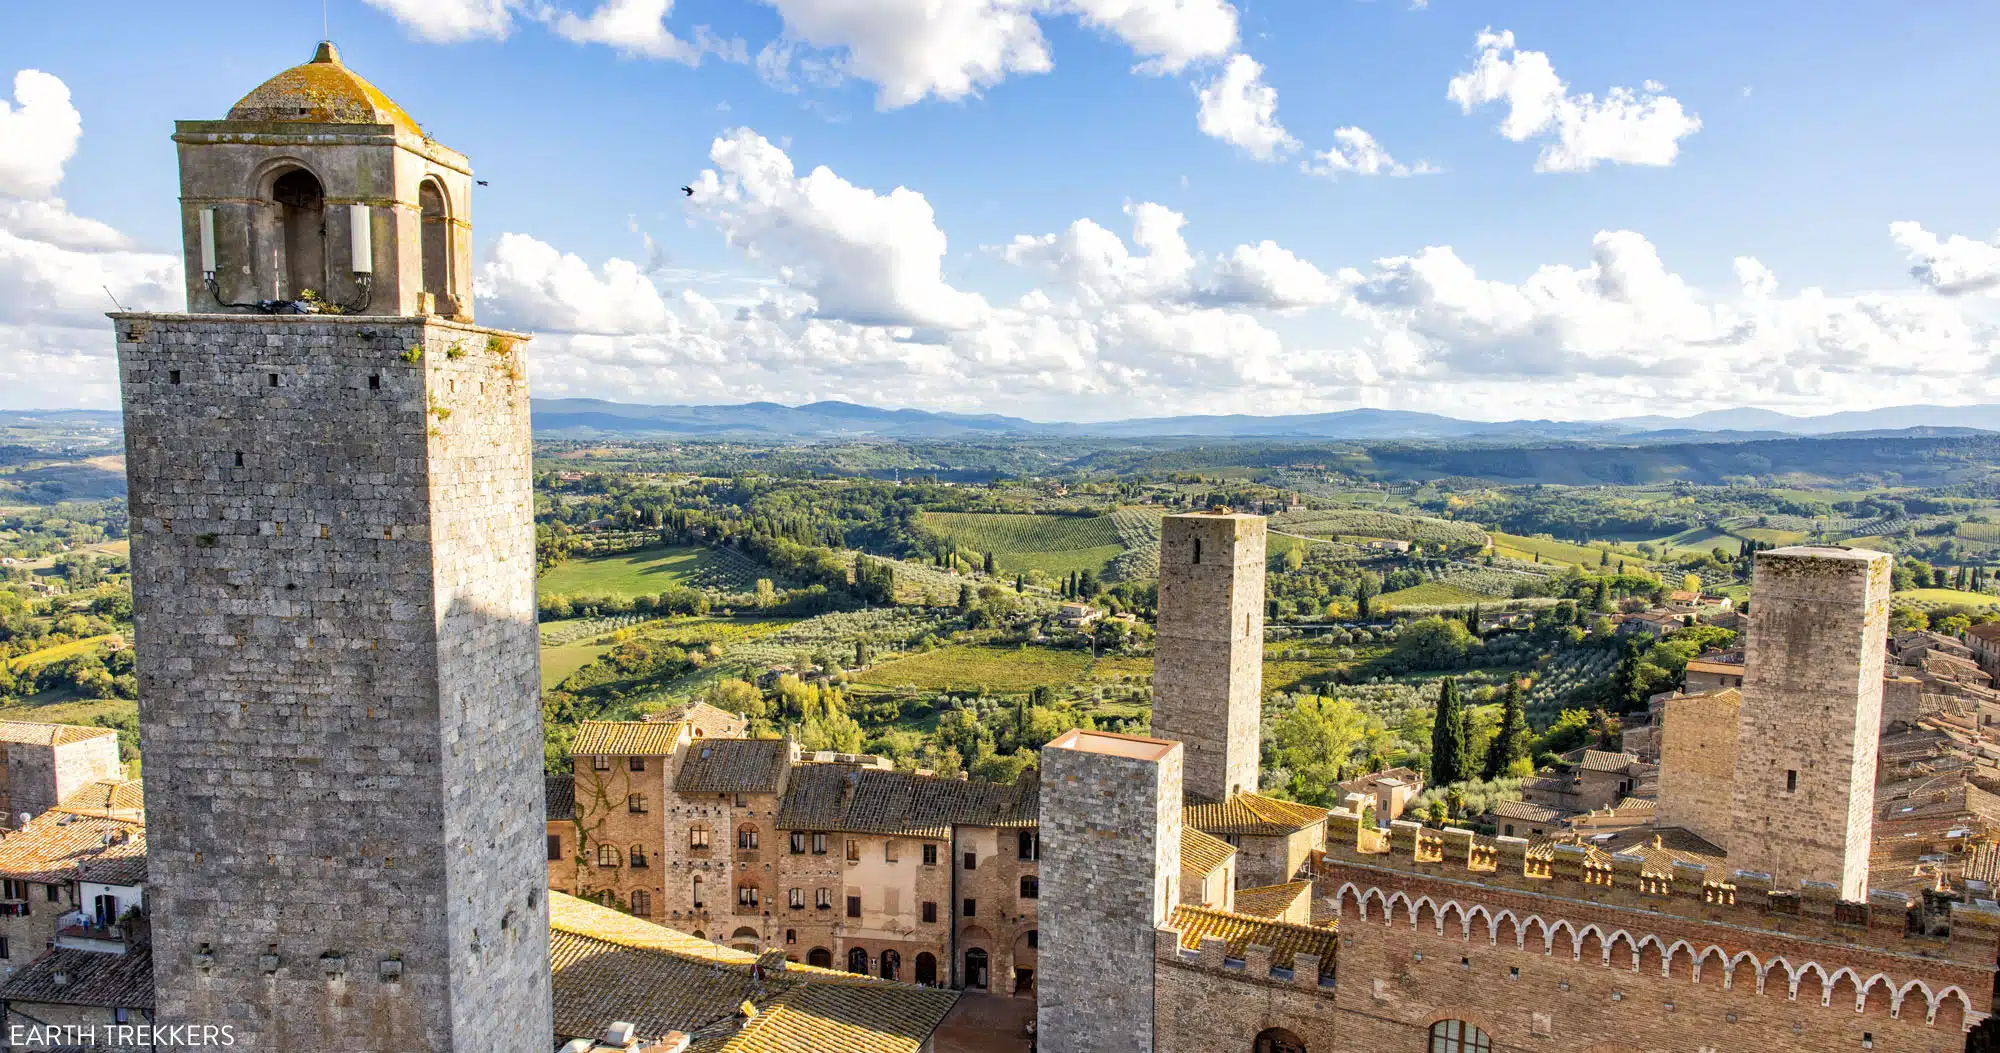 Featured image for “San Gimignano: Photo Tour & the Best Things to Do”